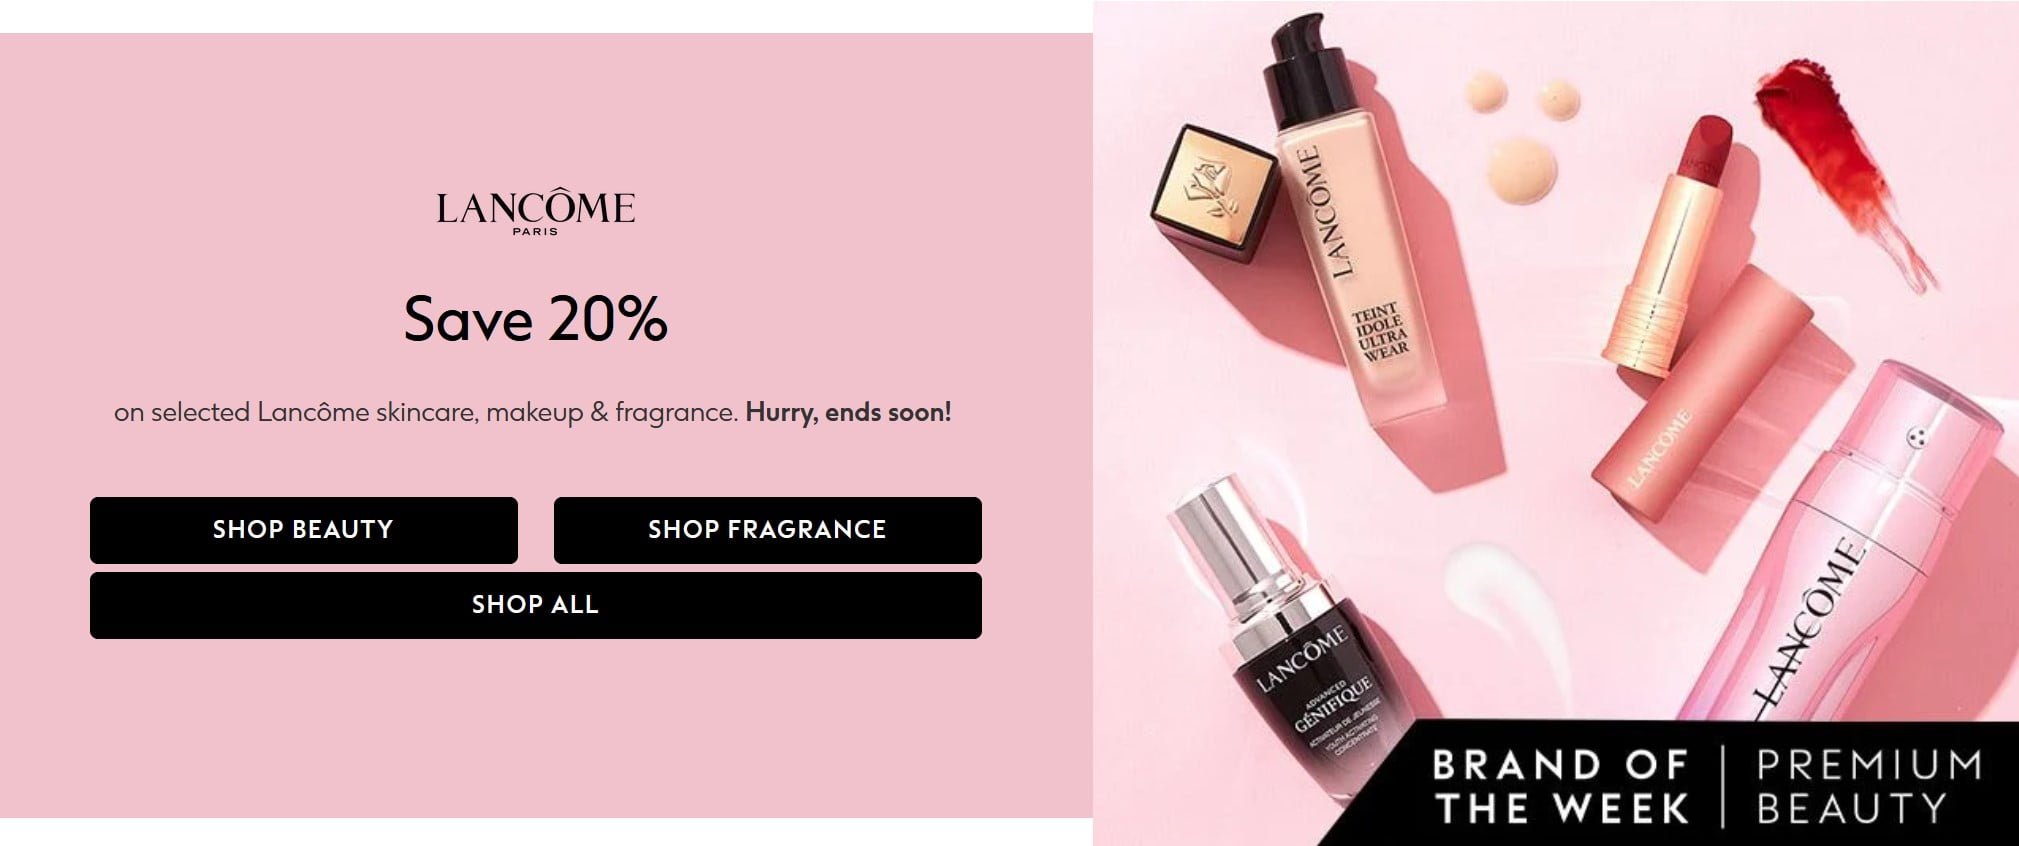 20% off Lancôme at Boots